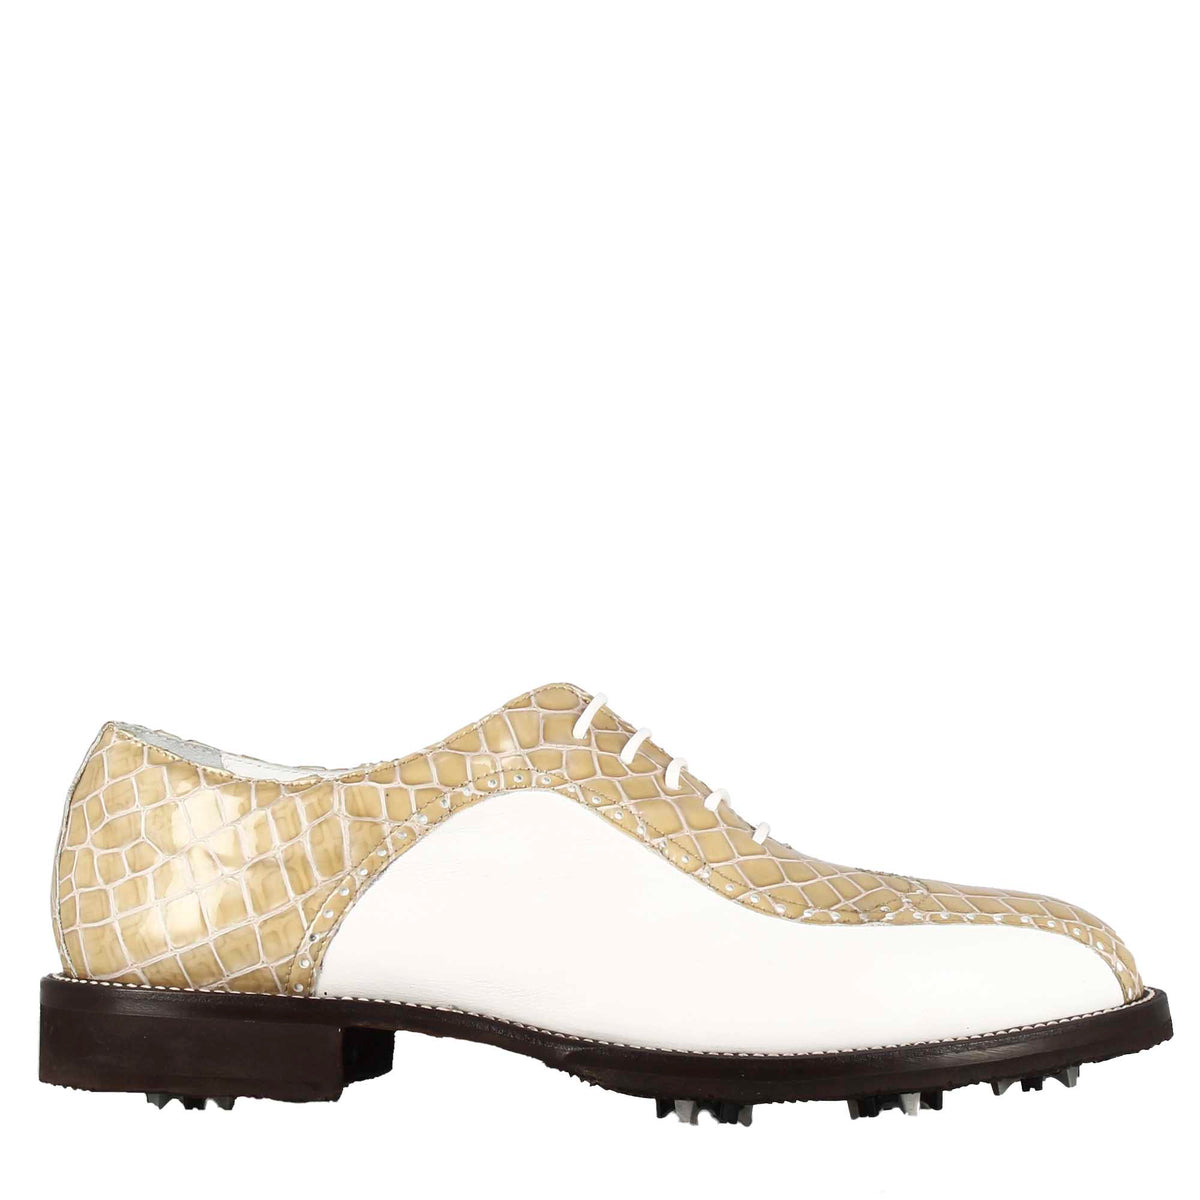 Man's golf shoes in white and beige two-tone leather with crocodile print